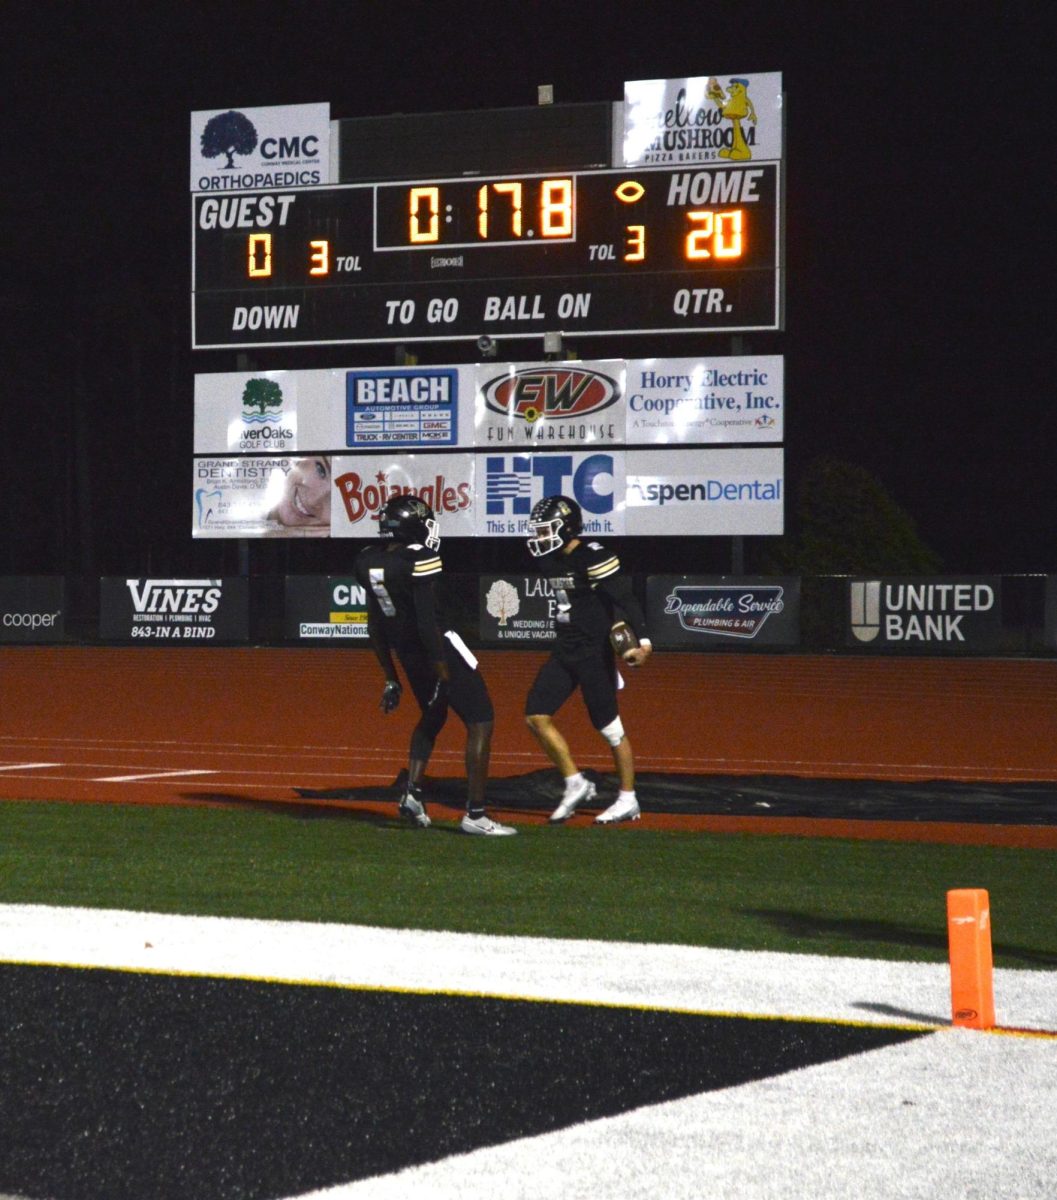 Rocco Wojcik (12) and Josh Brown (11) celebrate a long touchdown to go up 20-0 versus Wando. The team ended up winning 47-7, which advanced them to the playoffs.